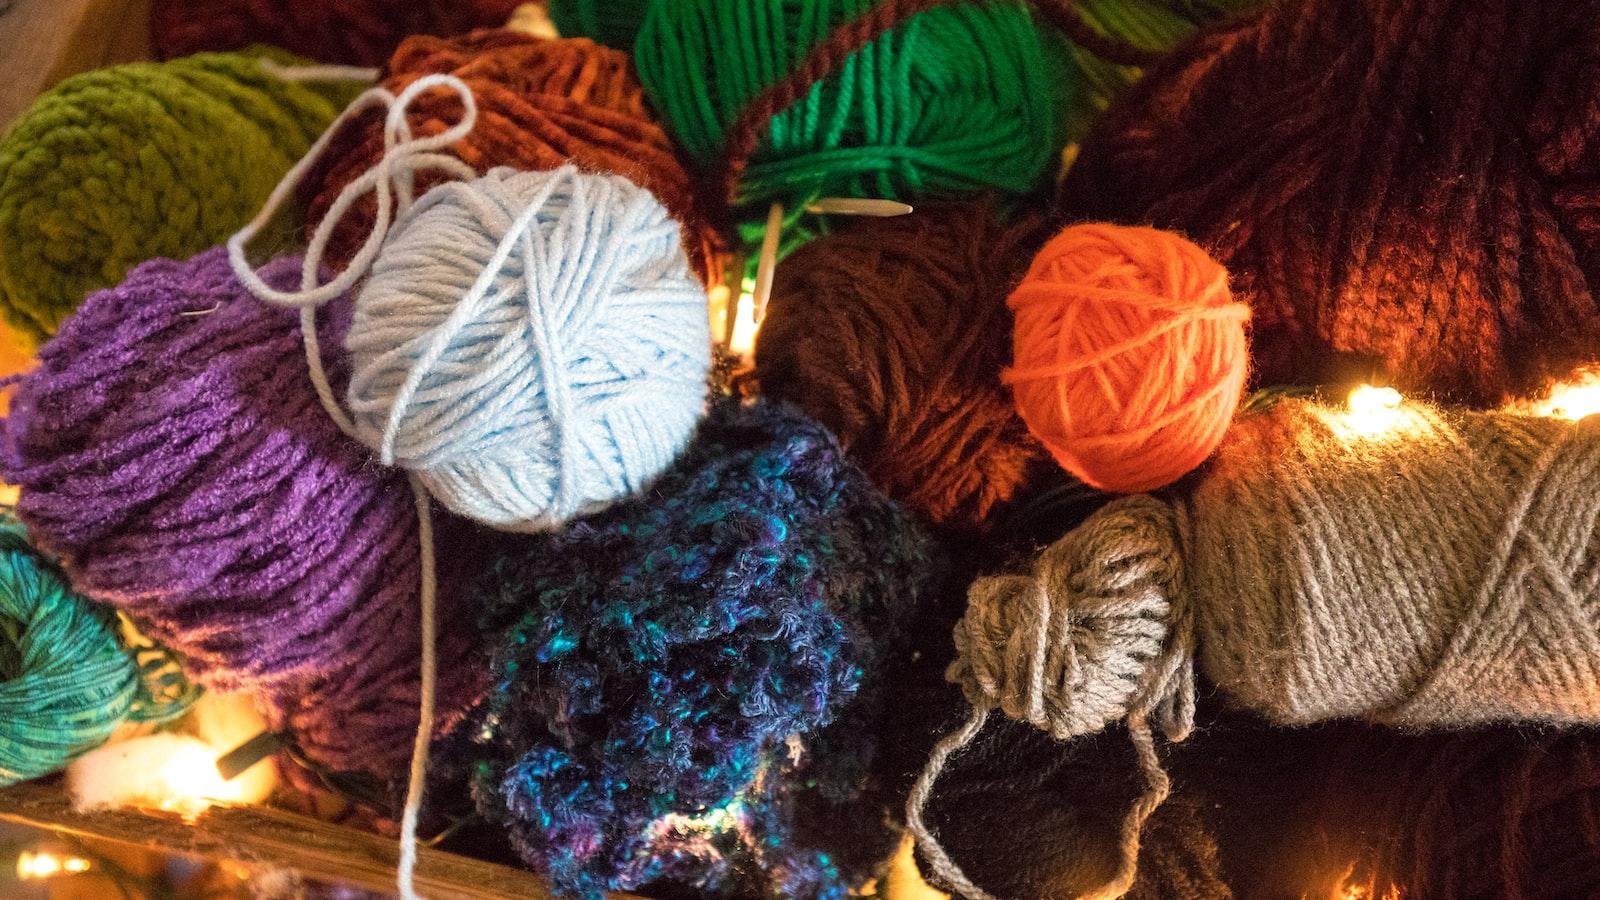 Knitting and Crochet: Crafting with Yarn